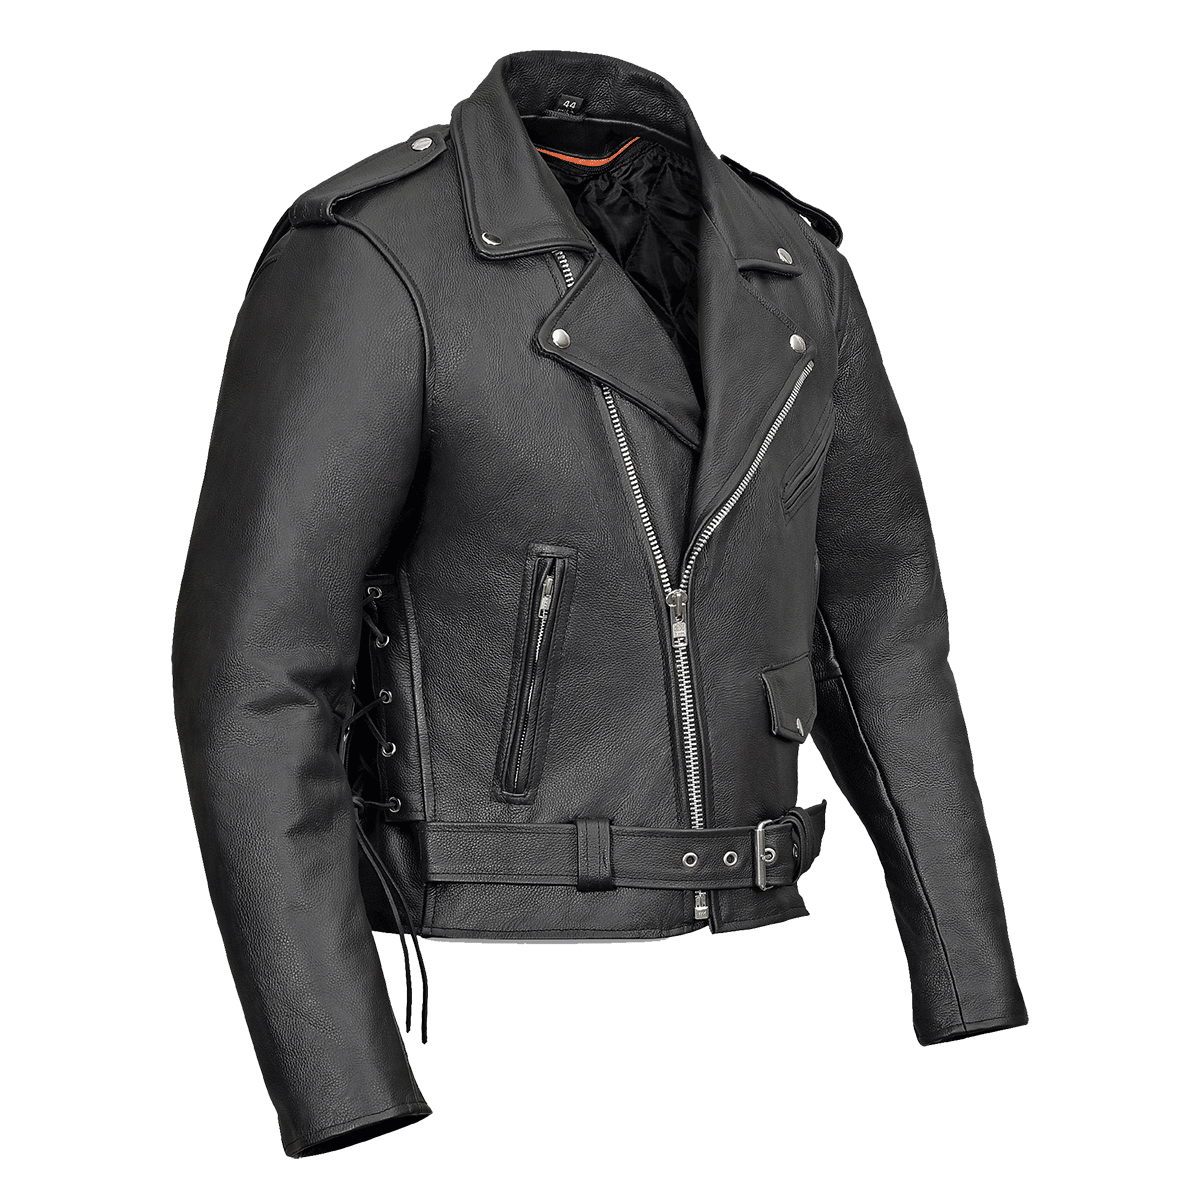 Vance Leather Men's Premium Classic Motorcycle Jacket Lace Sides & Z/O Liner